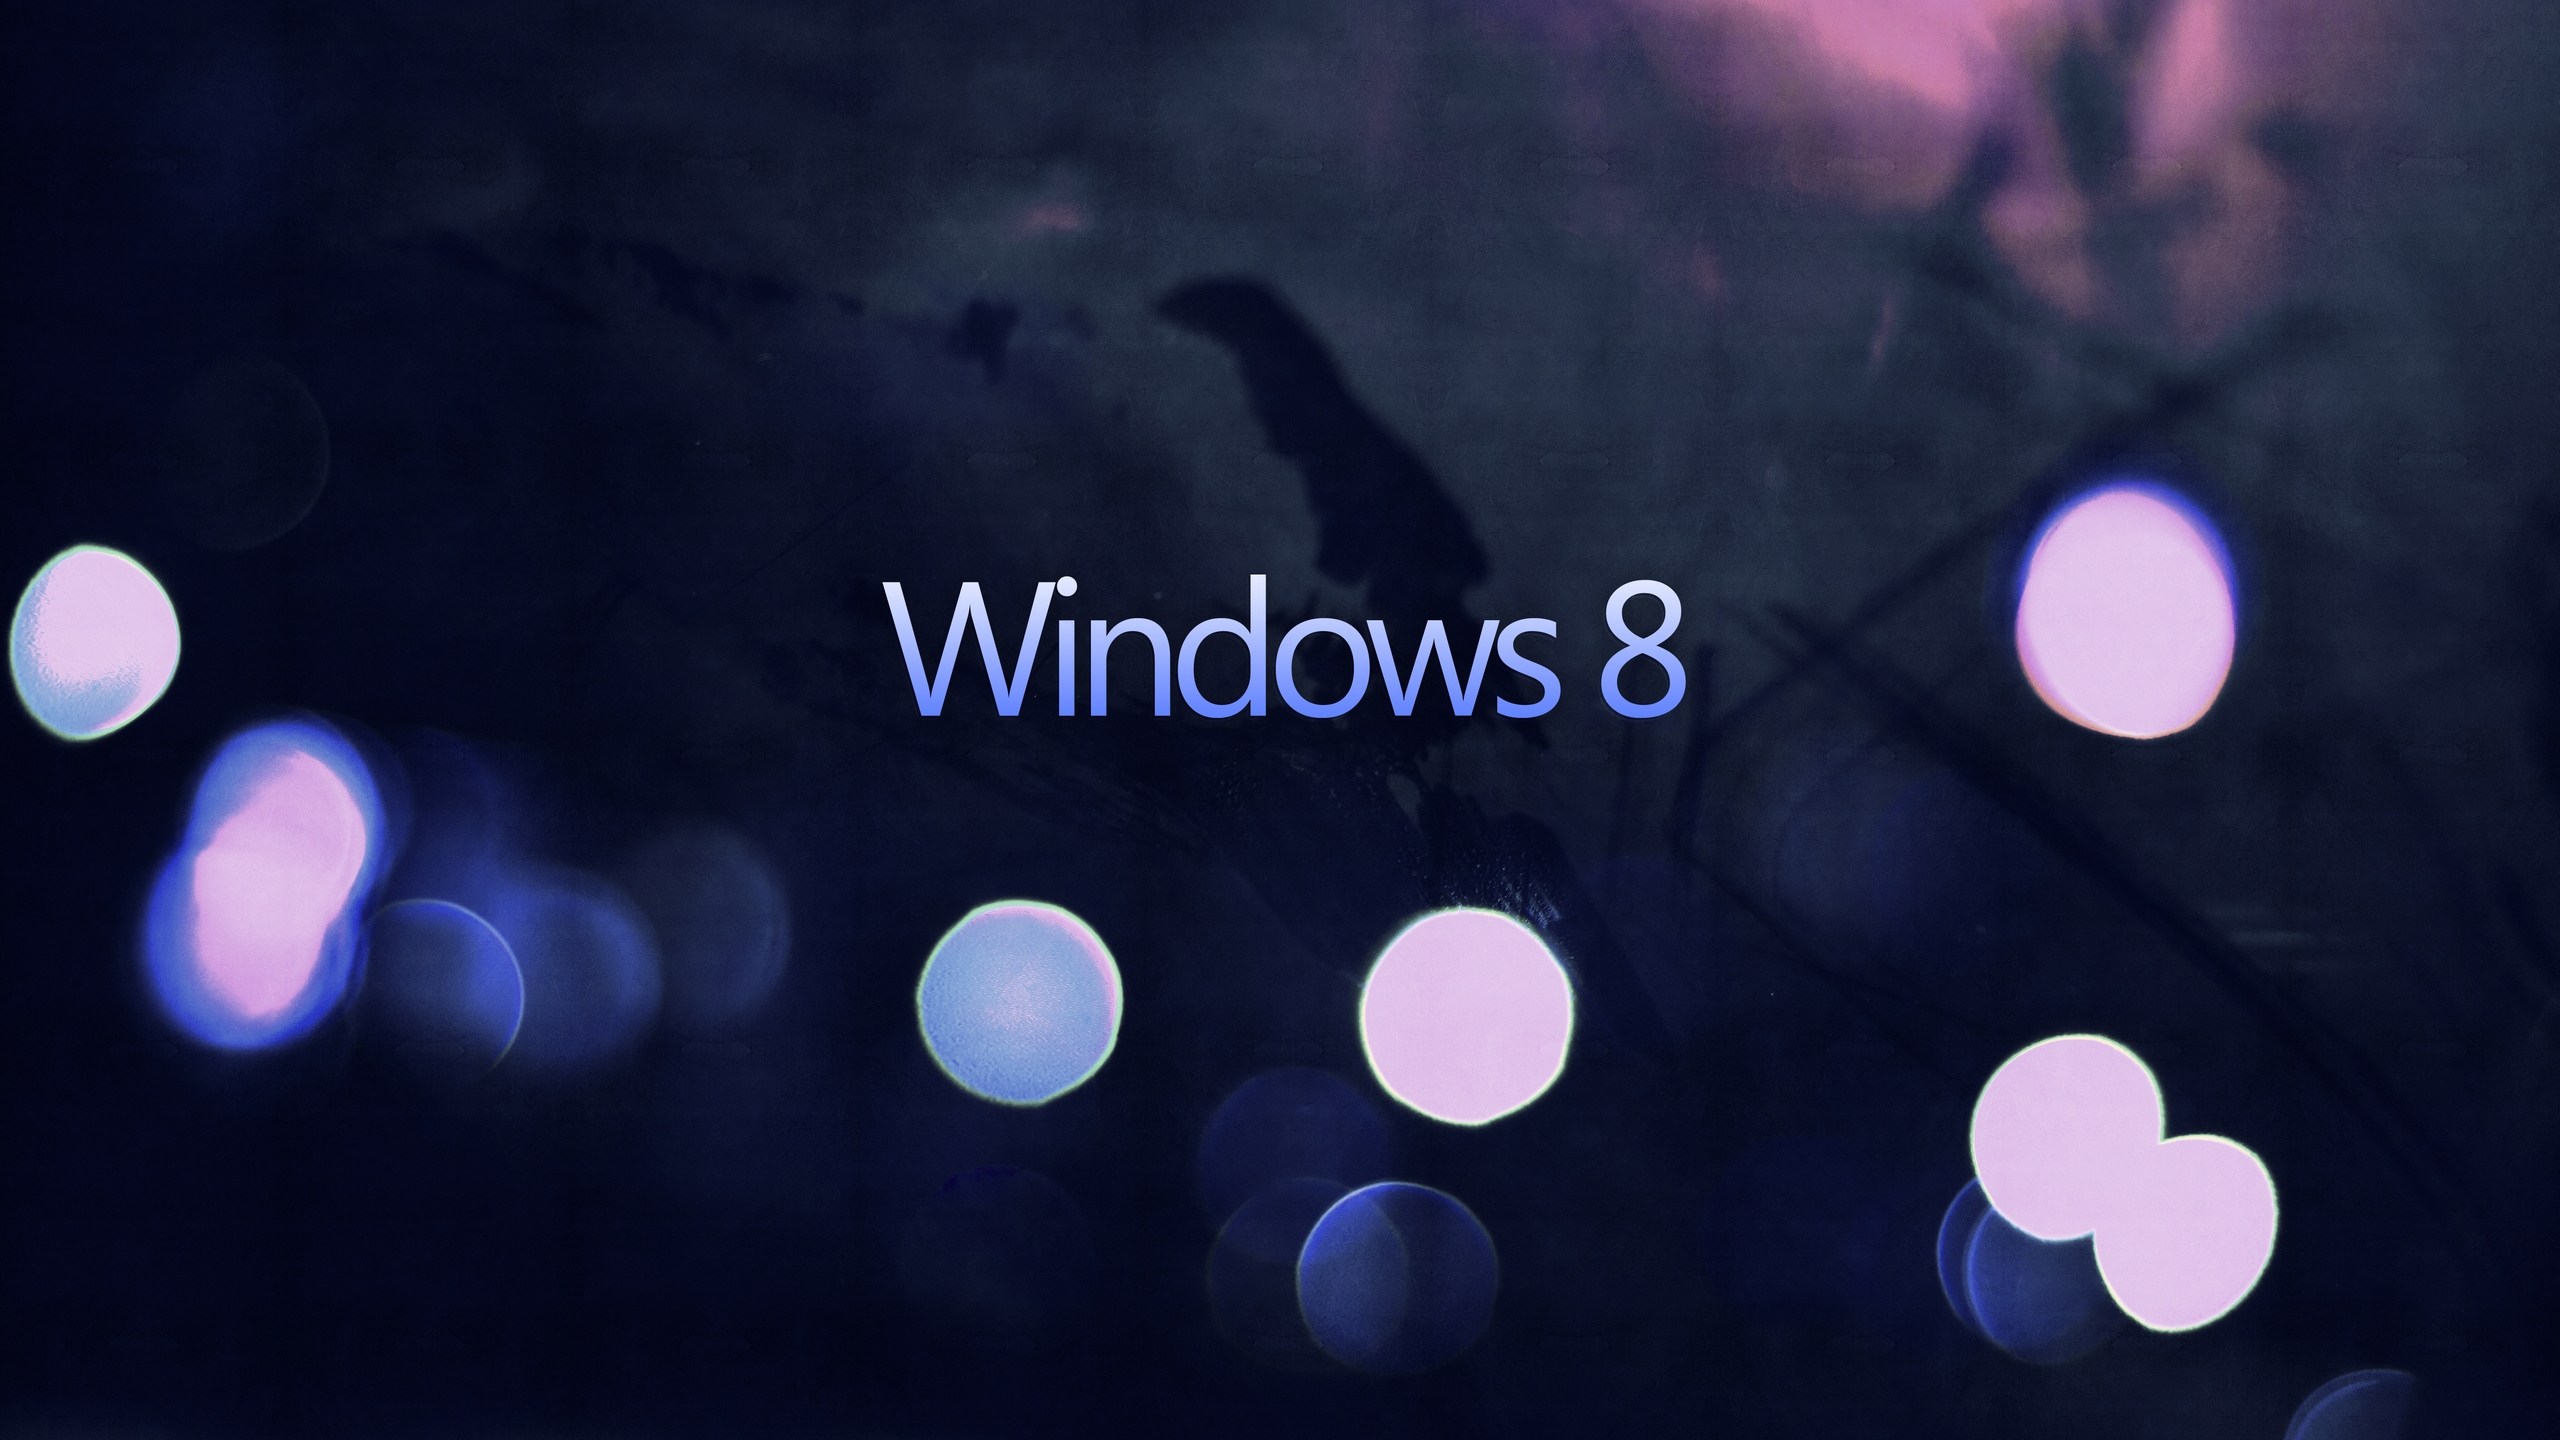 Simple Windows 8 for 2560x1440 HDTV resolution